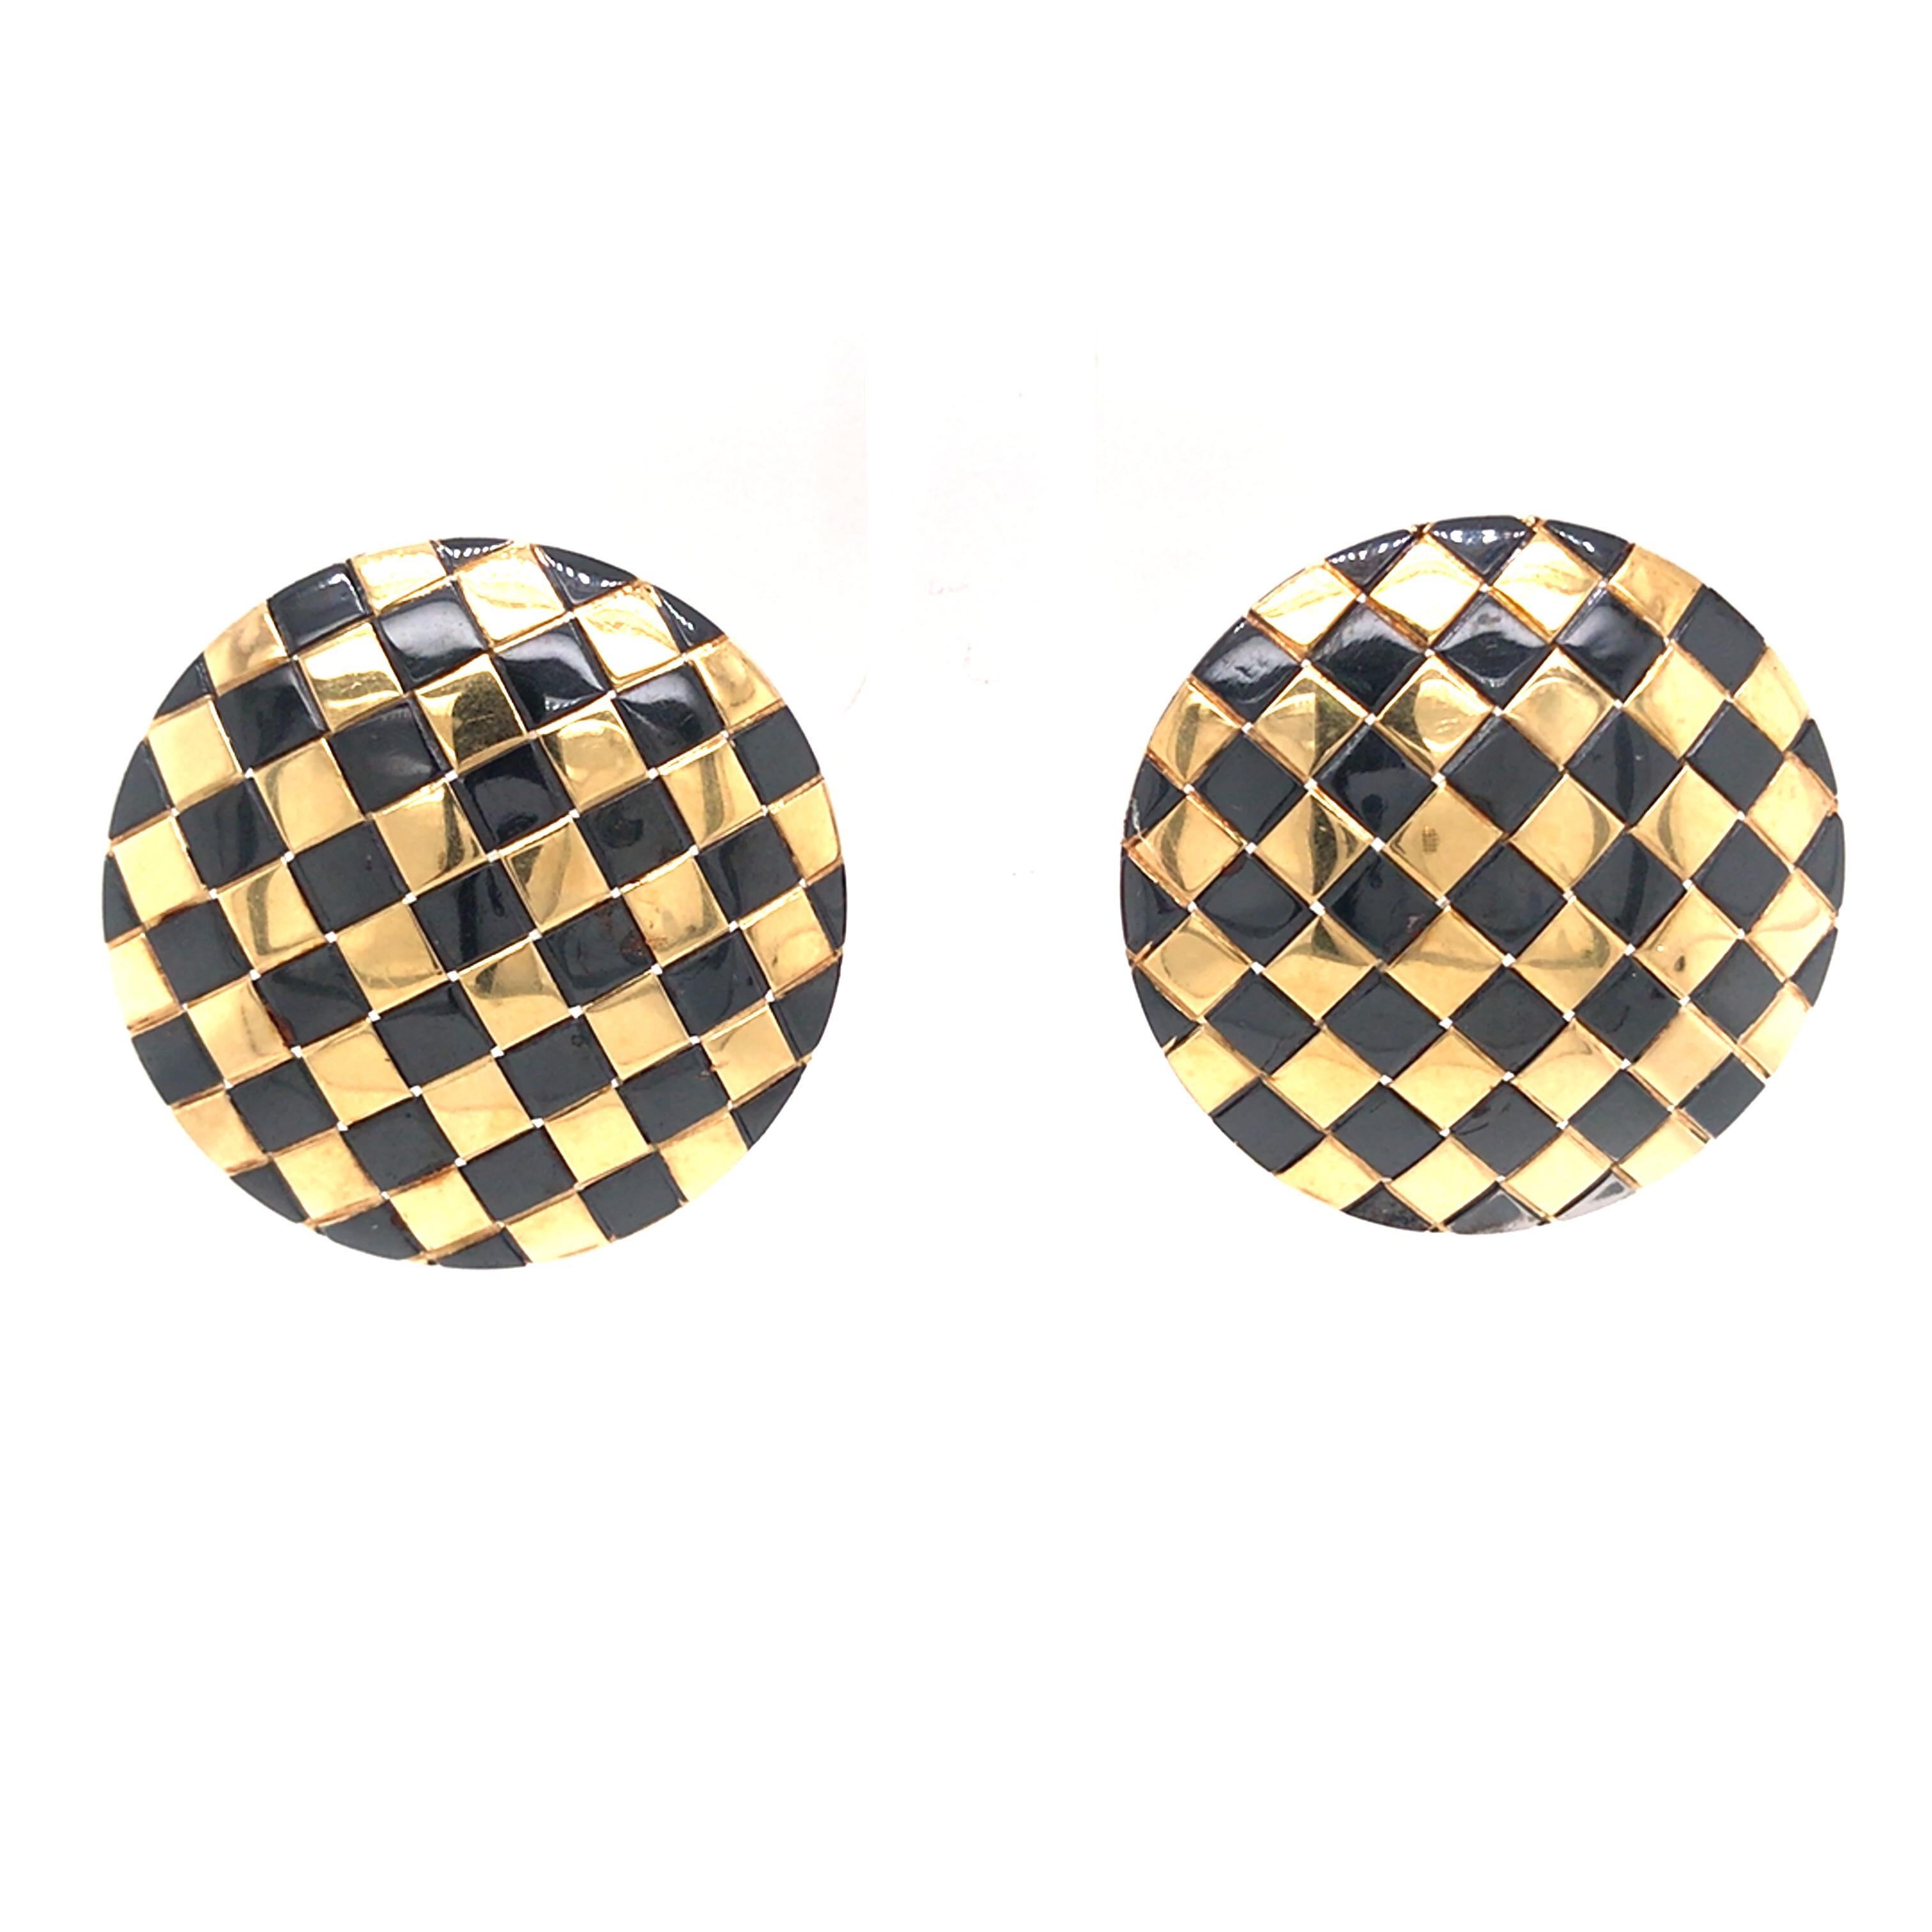 Checkered Button Earrings in 18K Yellow Gold.  The Earrings measure 1 inch in diameter.  13.68 grams. Stamped 7501581AL.